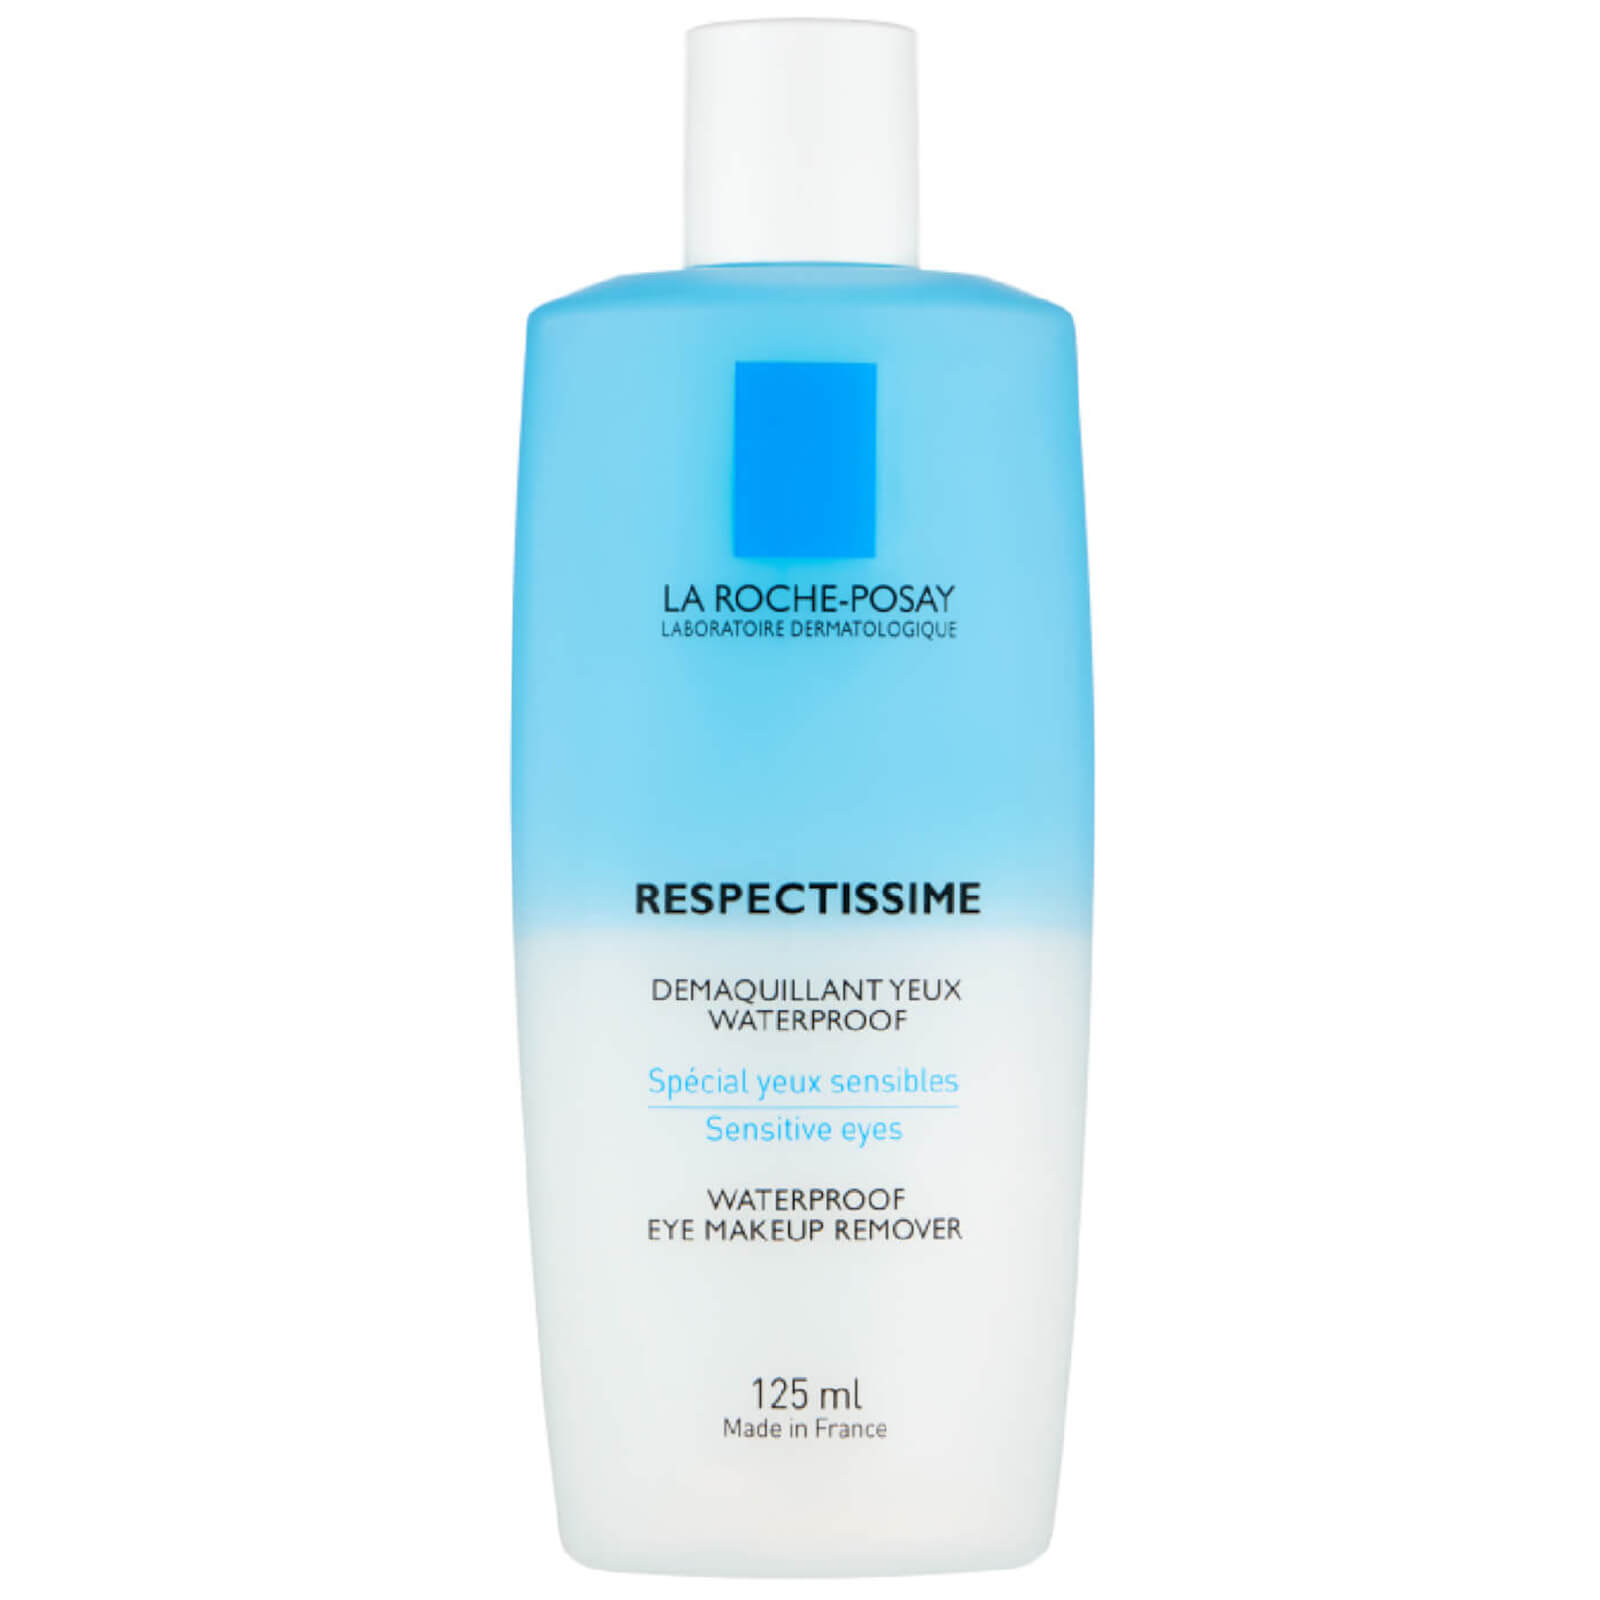 (1) LA ROCHE-POSAY | Respectissime Waterproof Eye Make-Up Remover / USE CODE YOU15 on cultbeauty